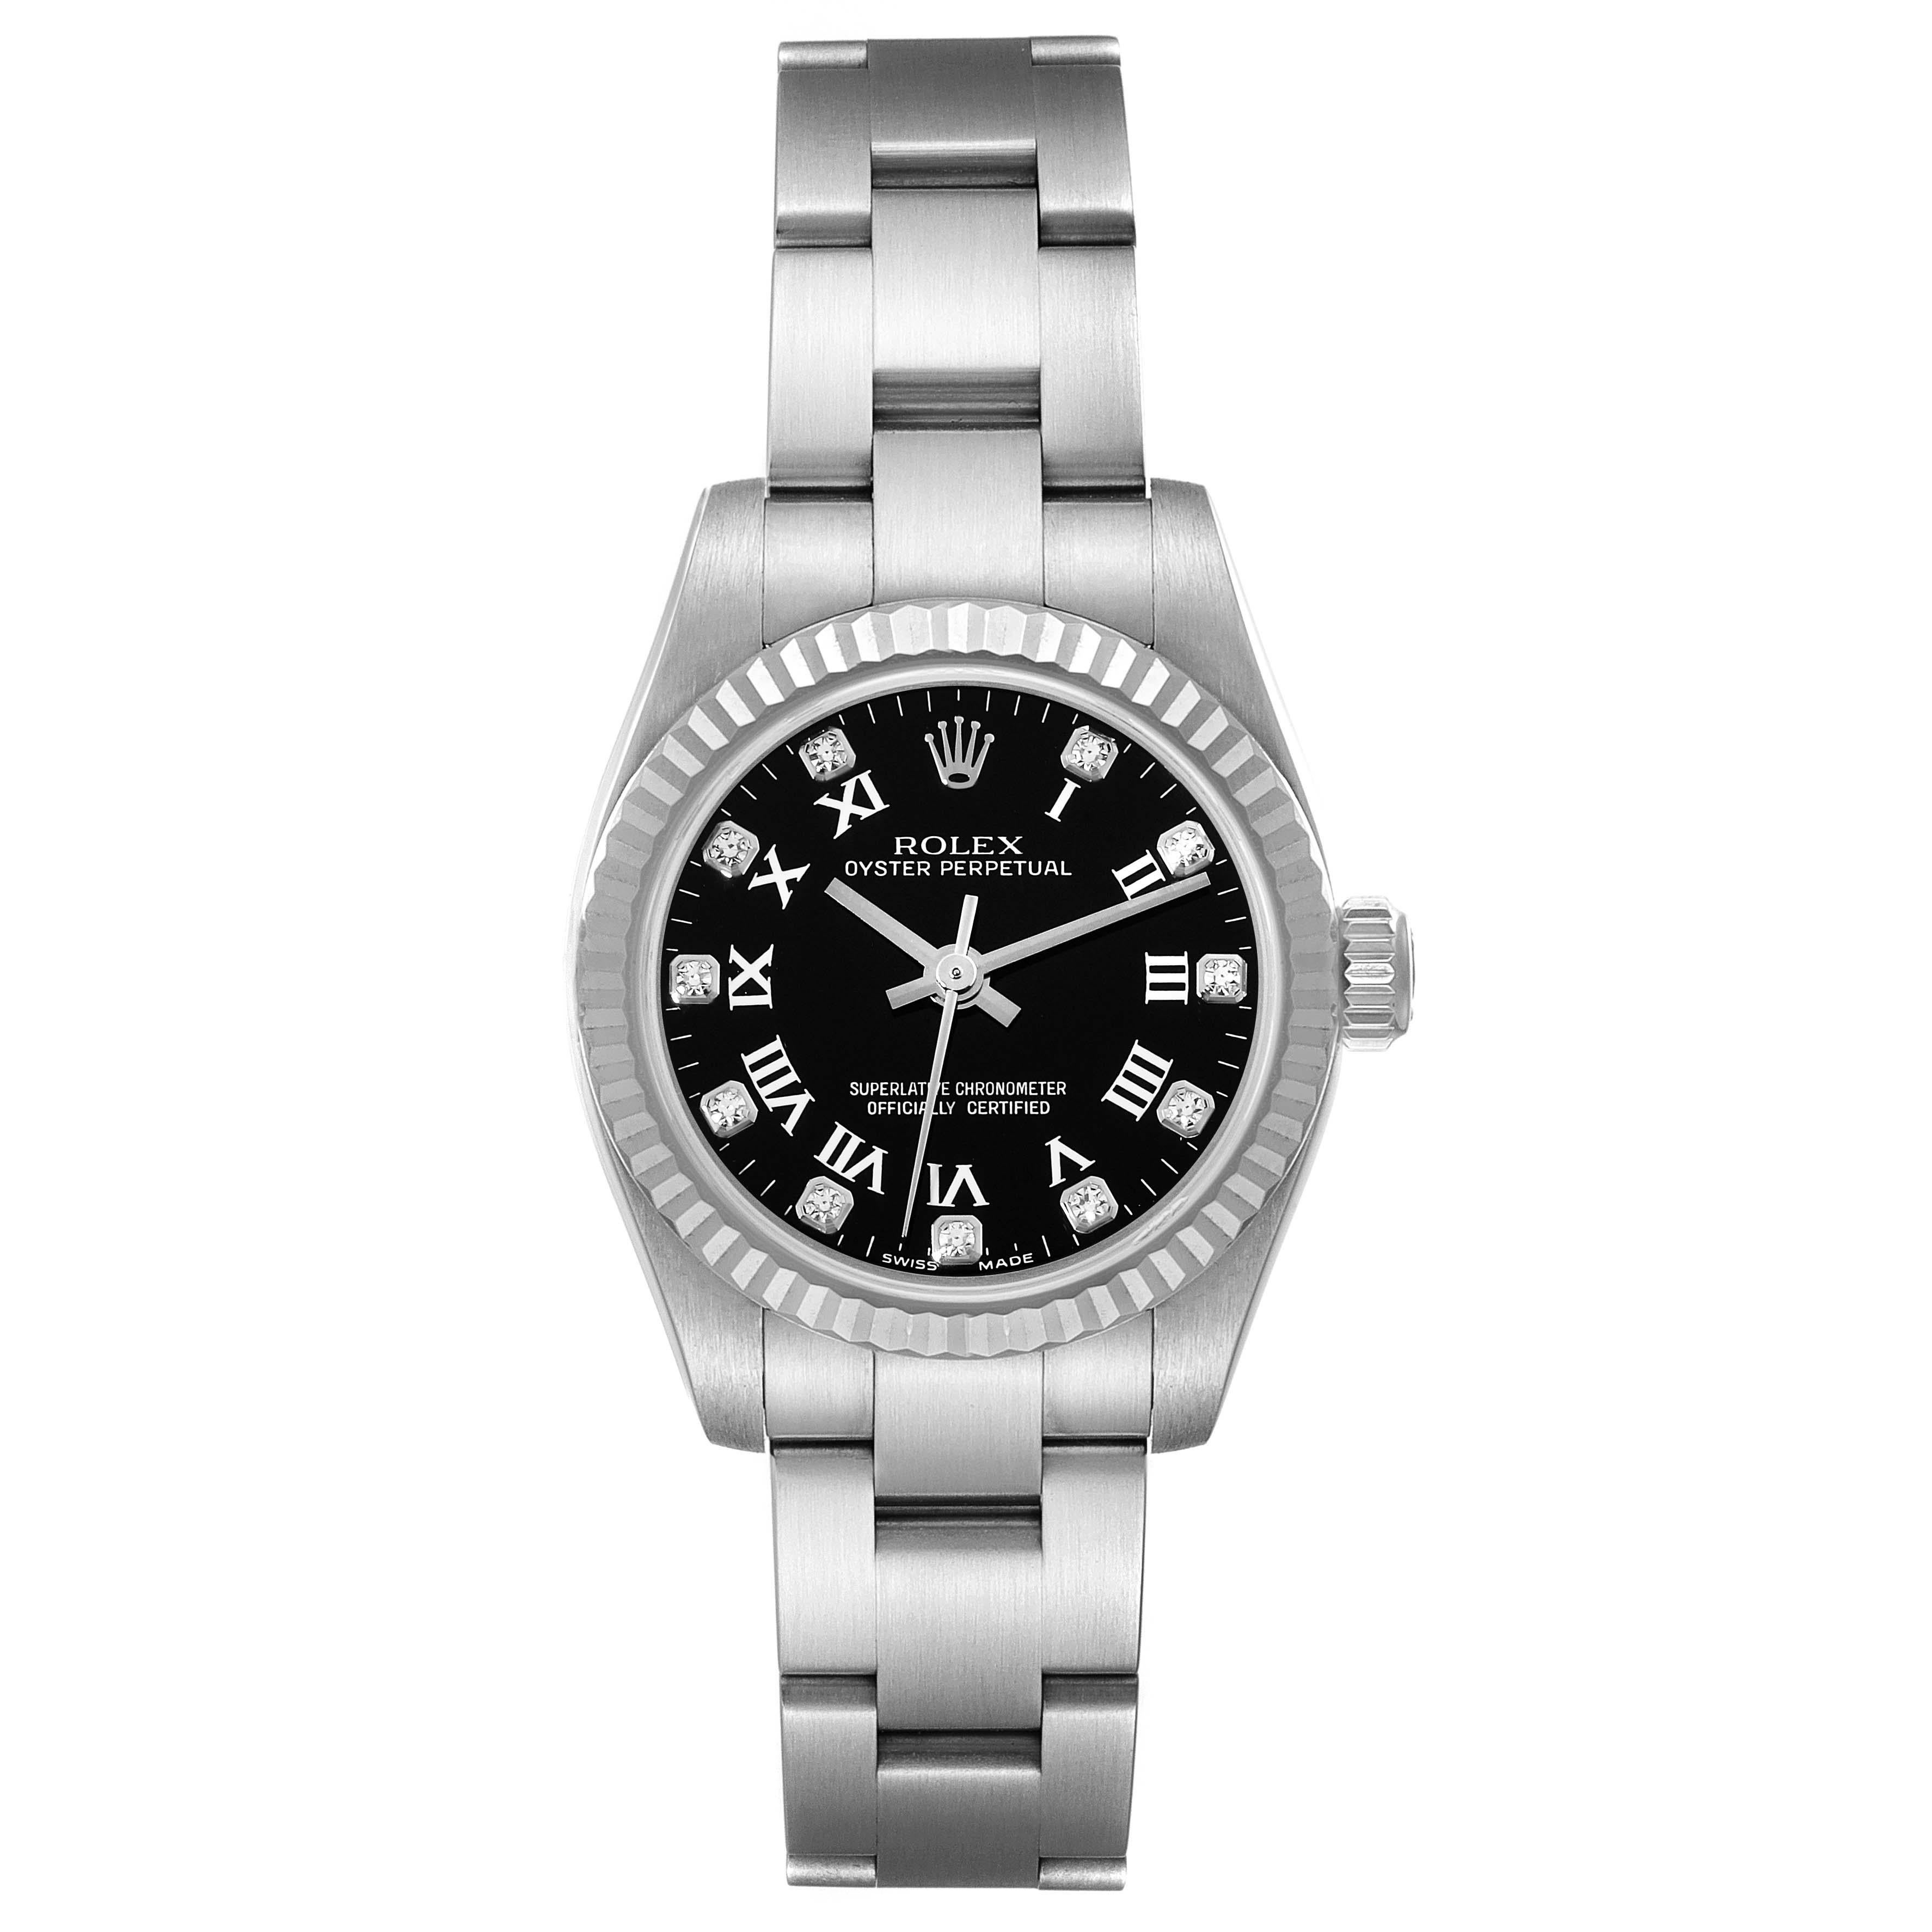 Rolex Oyster Perpetual Steel White Gold Diamond Ladies Watch 176234 Box Card. Officially certified chronometer self-winding movement with quickset date function. Stainless steel oyster case 26.0 mm in diameter. Rolex logo on a crown. 18K white gold